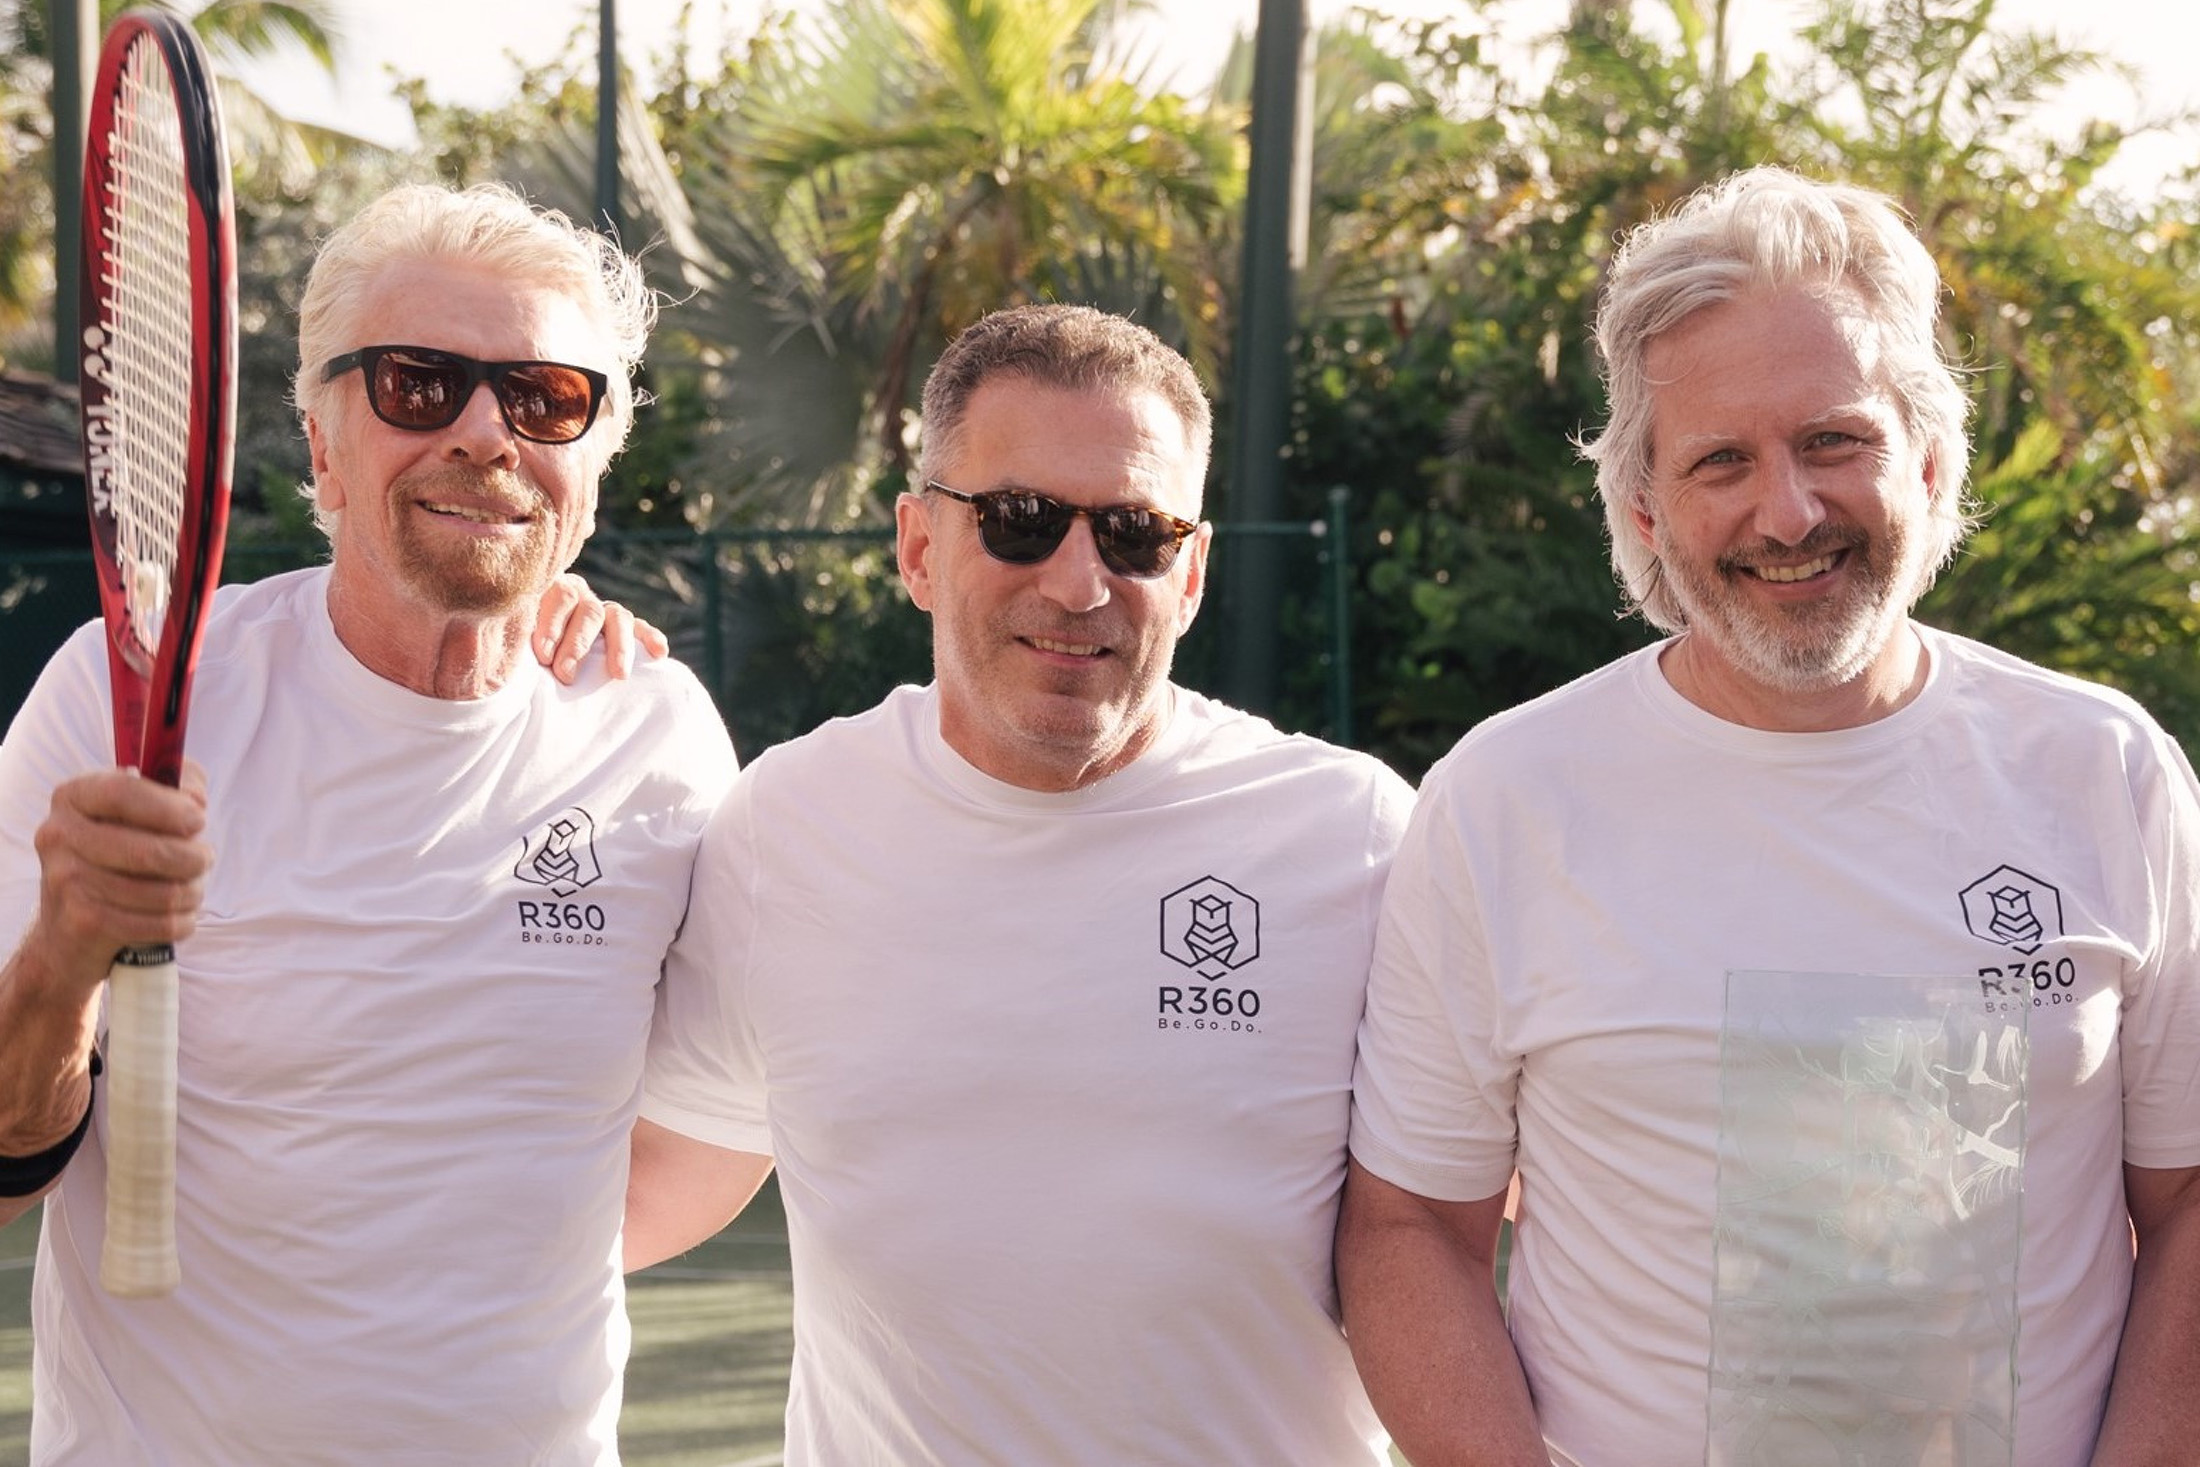 Richard Branson, from left, during an R360 networking tennis match with Michael Cole and Christopher Ryan, a former Tiger 21 chair in Texas and Puerto Rico and chief executive officer of&nbsp;GoBundance, a professional networking group.